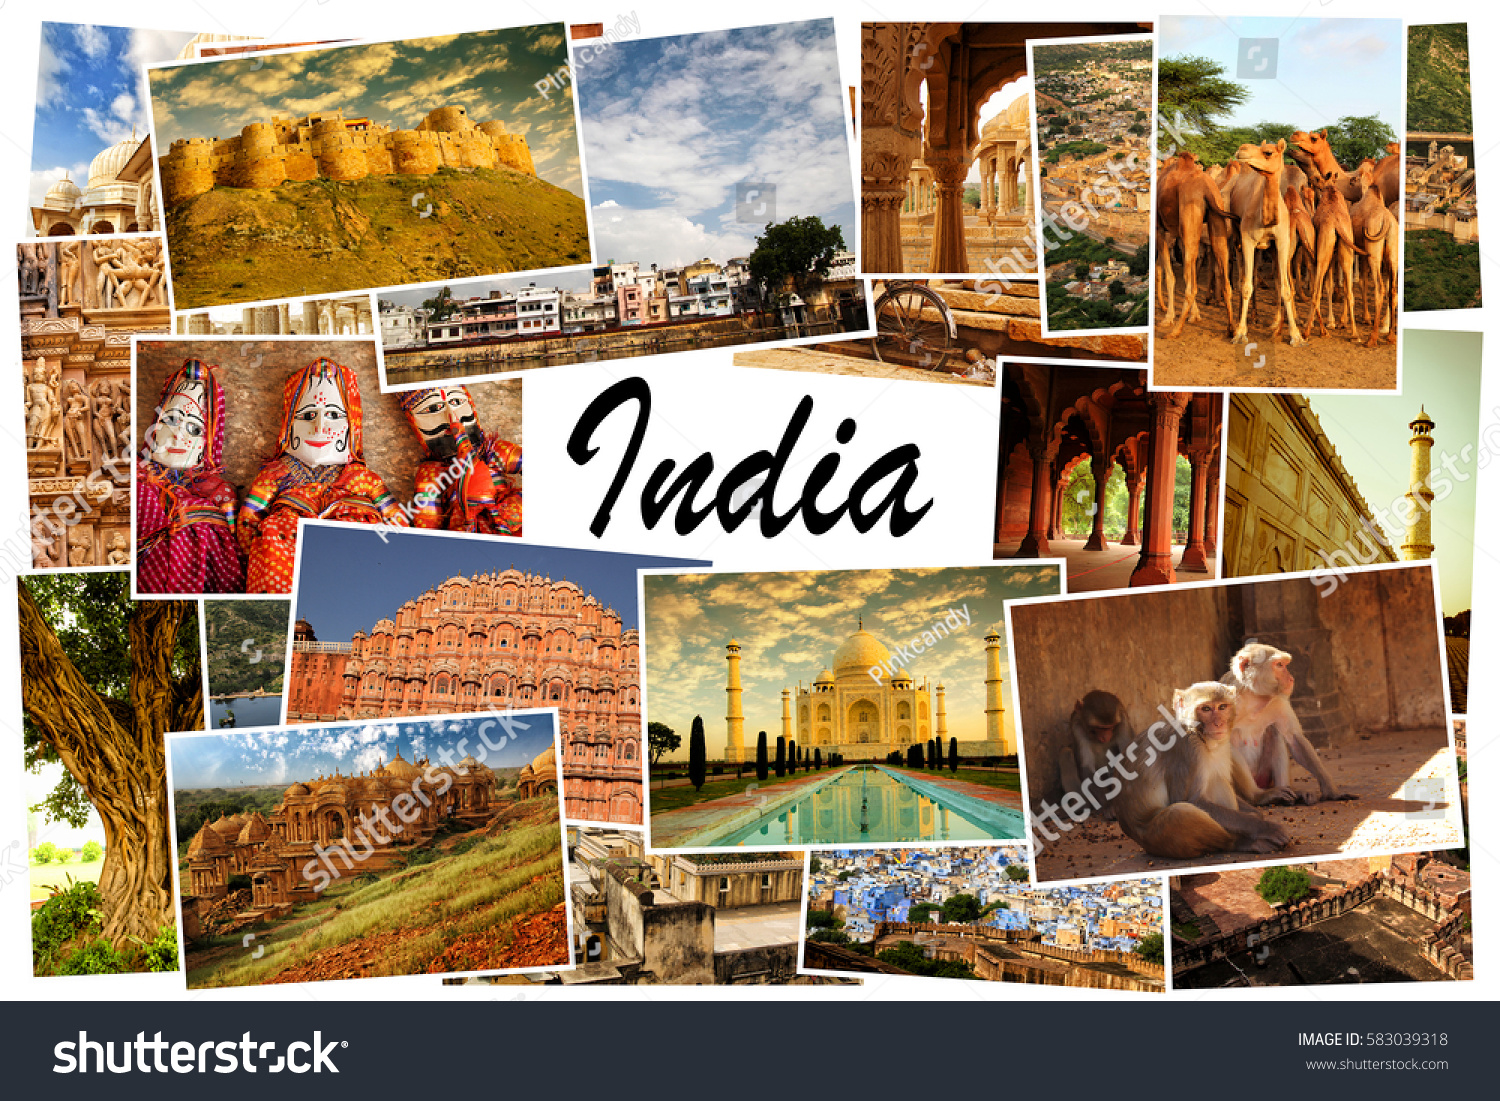 Collage Images Famous Location Rajasthan North Stock Photo 583039318 |  Shutterstock